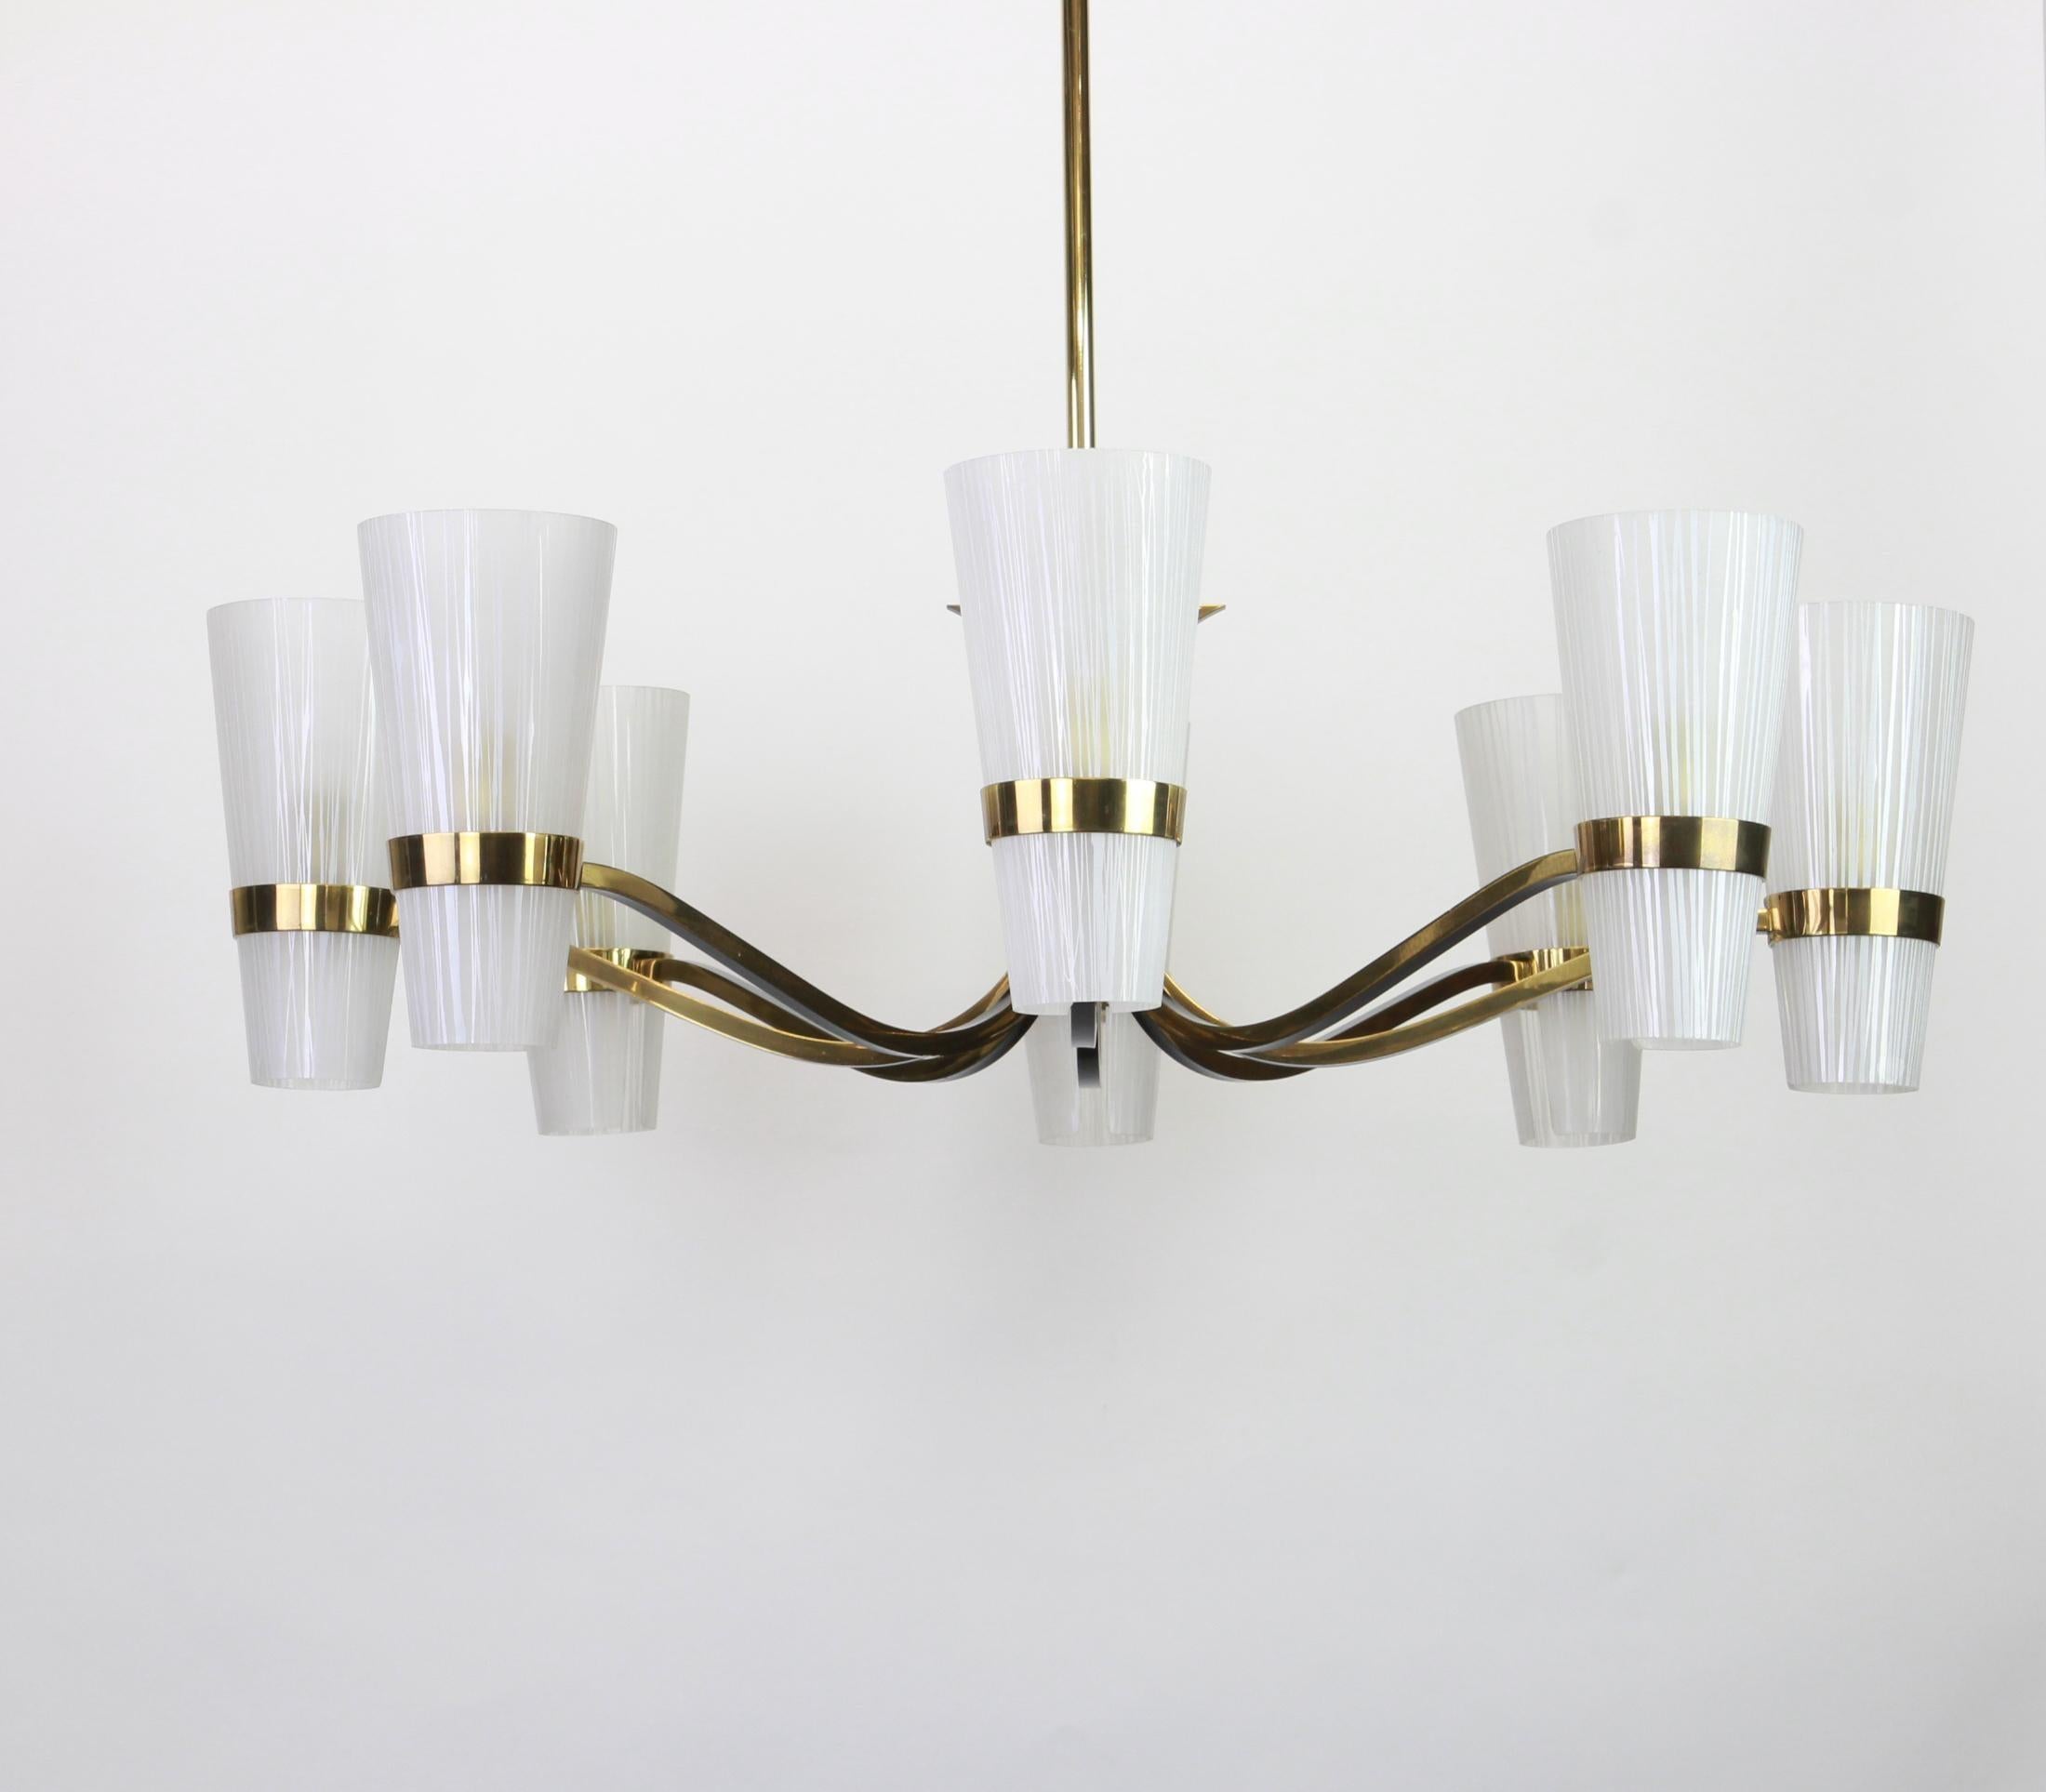 Stunning midcentury sunburst chandelier, in Stilnovo style made in the 1950s.
Very elegant and rare version with handmade glass shades.

High quality and in very good condition. Cleaned, well-wired and ready to use. 

The fixture requires 8 x E14